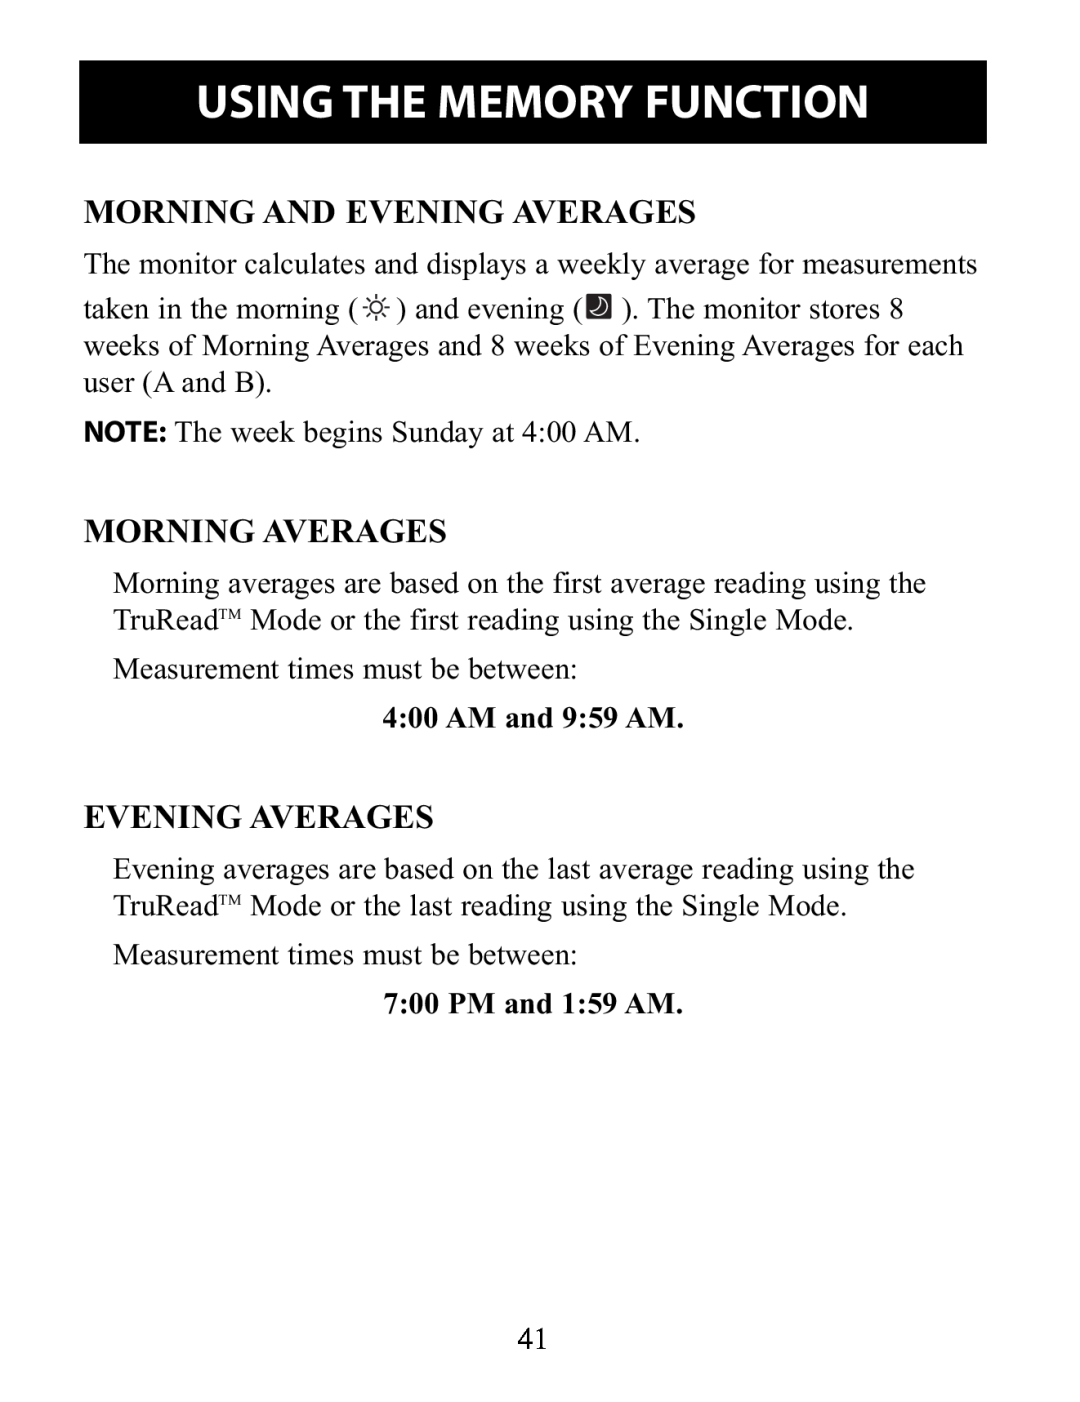 Omron Healthcare BP791IT instruction manual Morning And Evening Averages, Morning Averages, AM and 959 AM, PM and 159 AM 